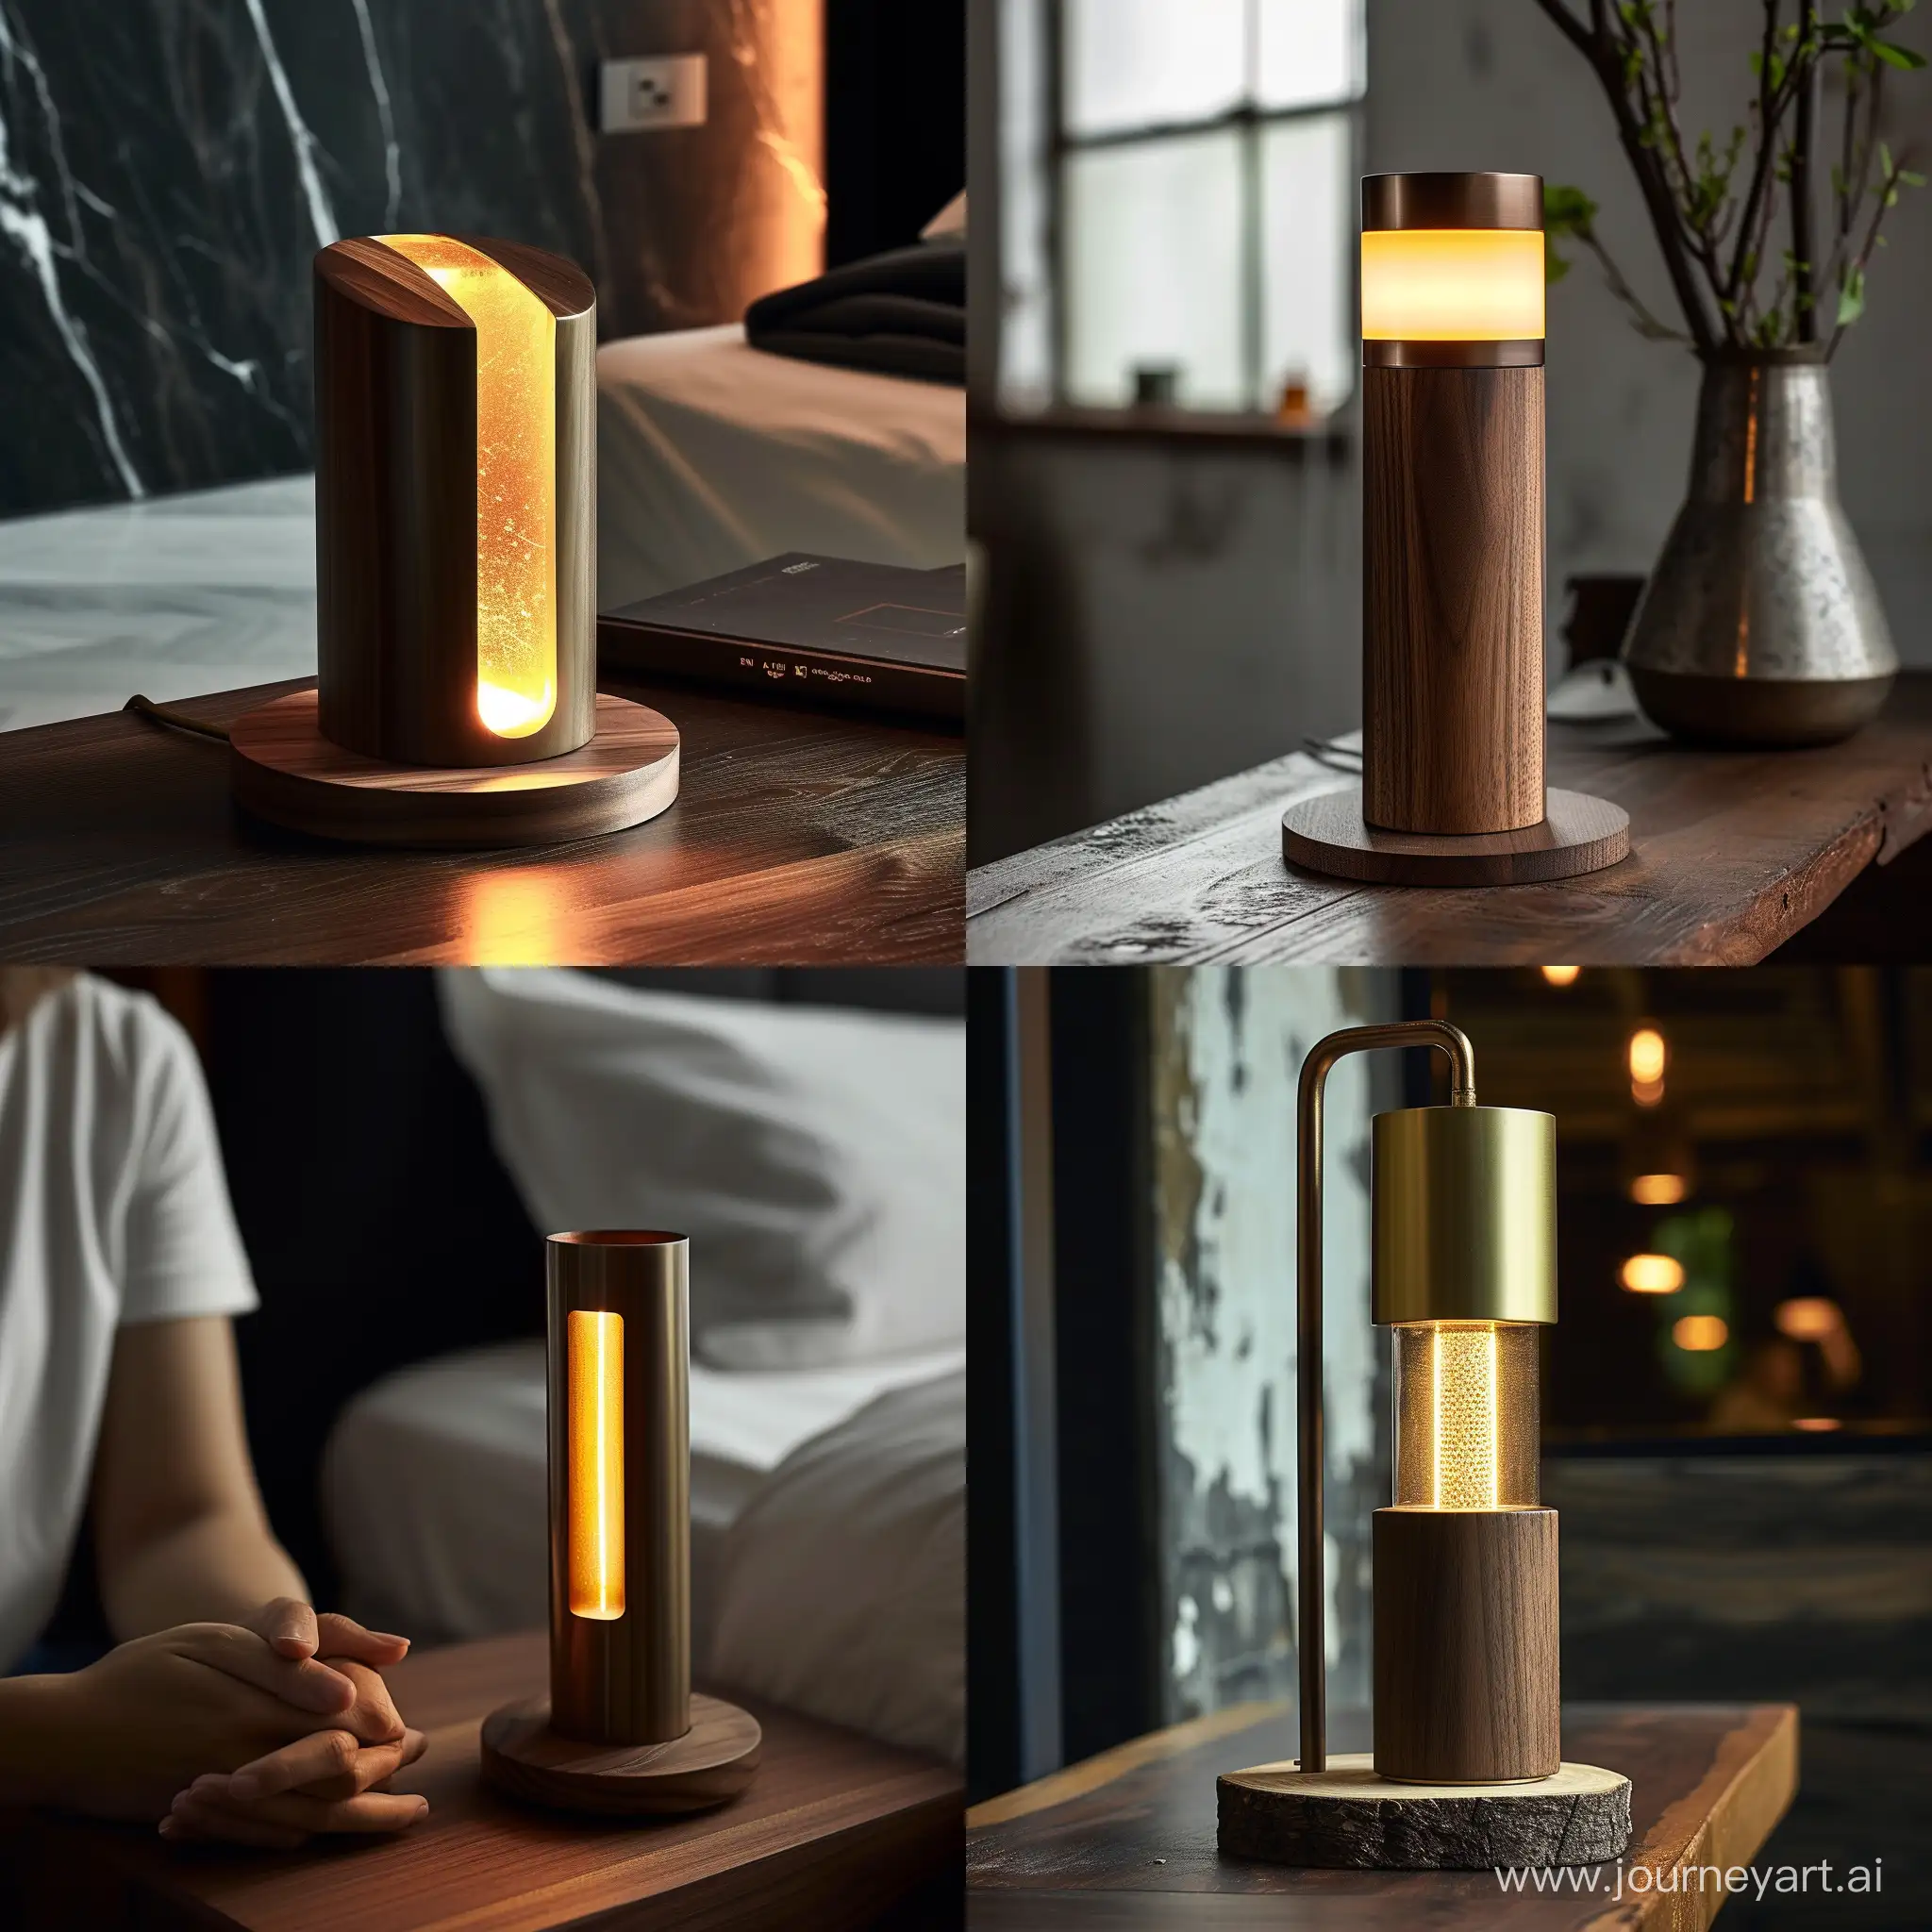 design a highly creative bedside lamp made from bronze and walnut wood. The lamp should exude a soothing and warm glow, complementing a minimalist and luxurious style. Capture the lamp in an industrial photography setting within a luxurious environment